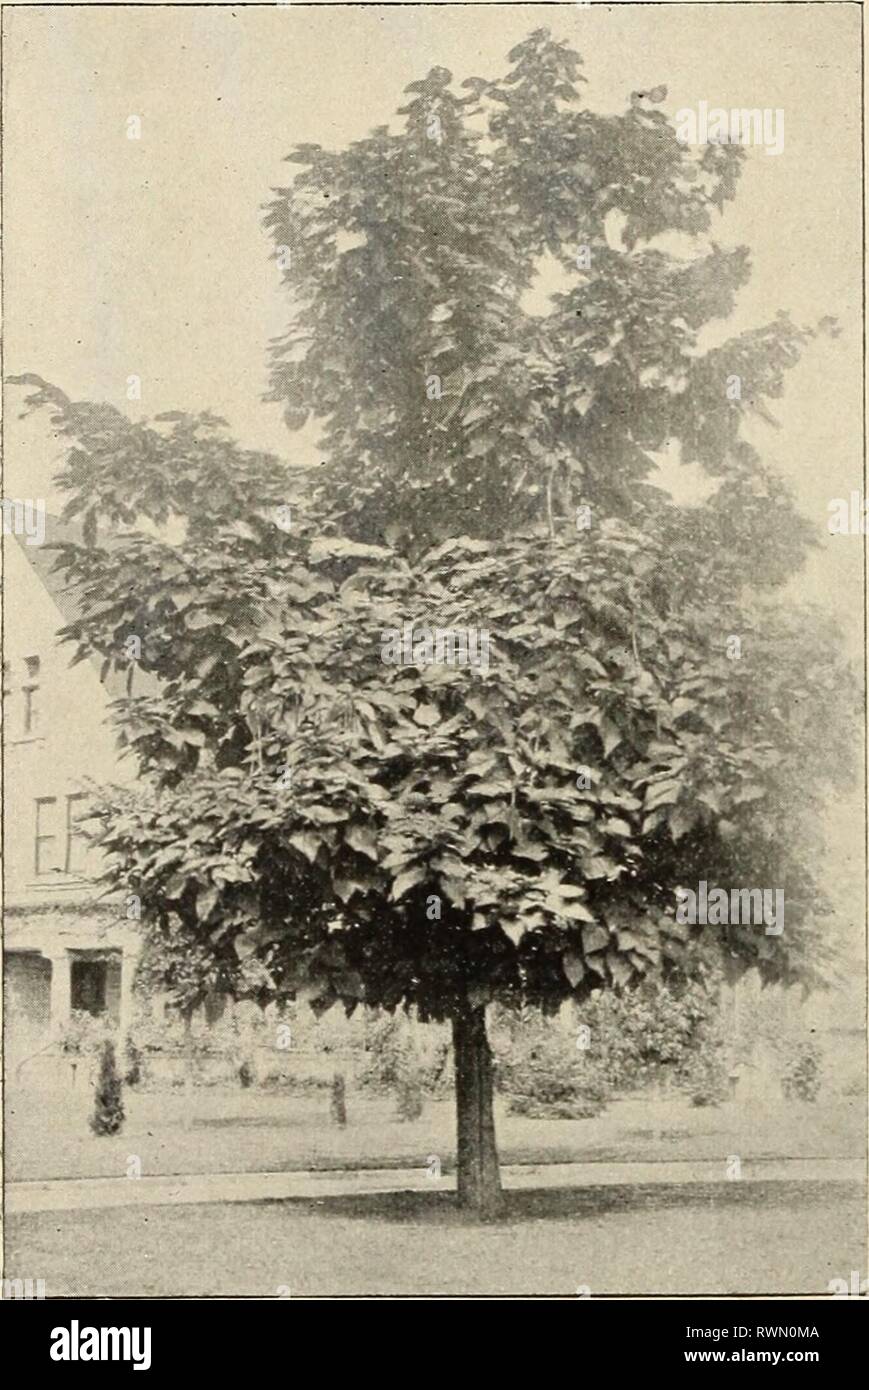 Ellwanger & Barry  Mount Ellwanger & Barry : Mount Hope nurseries ellwangerbarrymo1899moun Year: 1899  44 ELLWAXGER &^ BARRY'S CATALPA. Trompetenbaum, Ger. Catalpa, J^r. The Catalpas flower in July, when few trees are in bloom. Their blossoms are large, very showy, and quite fragrant. Leaves large, heart-shaped, and yellowish green. They are all effective, tropical-looking lawn trees. Bungei. Chinese Catalpa. D. A species from China, of dwarf habit, growing only from three to five feet high. Foliage large and glossy; a shy bloomer. Top-grafted on tall stems it makes an effective umbrella- shap Stock Photo